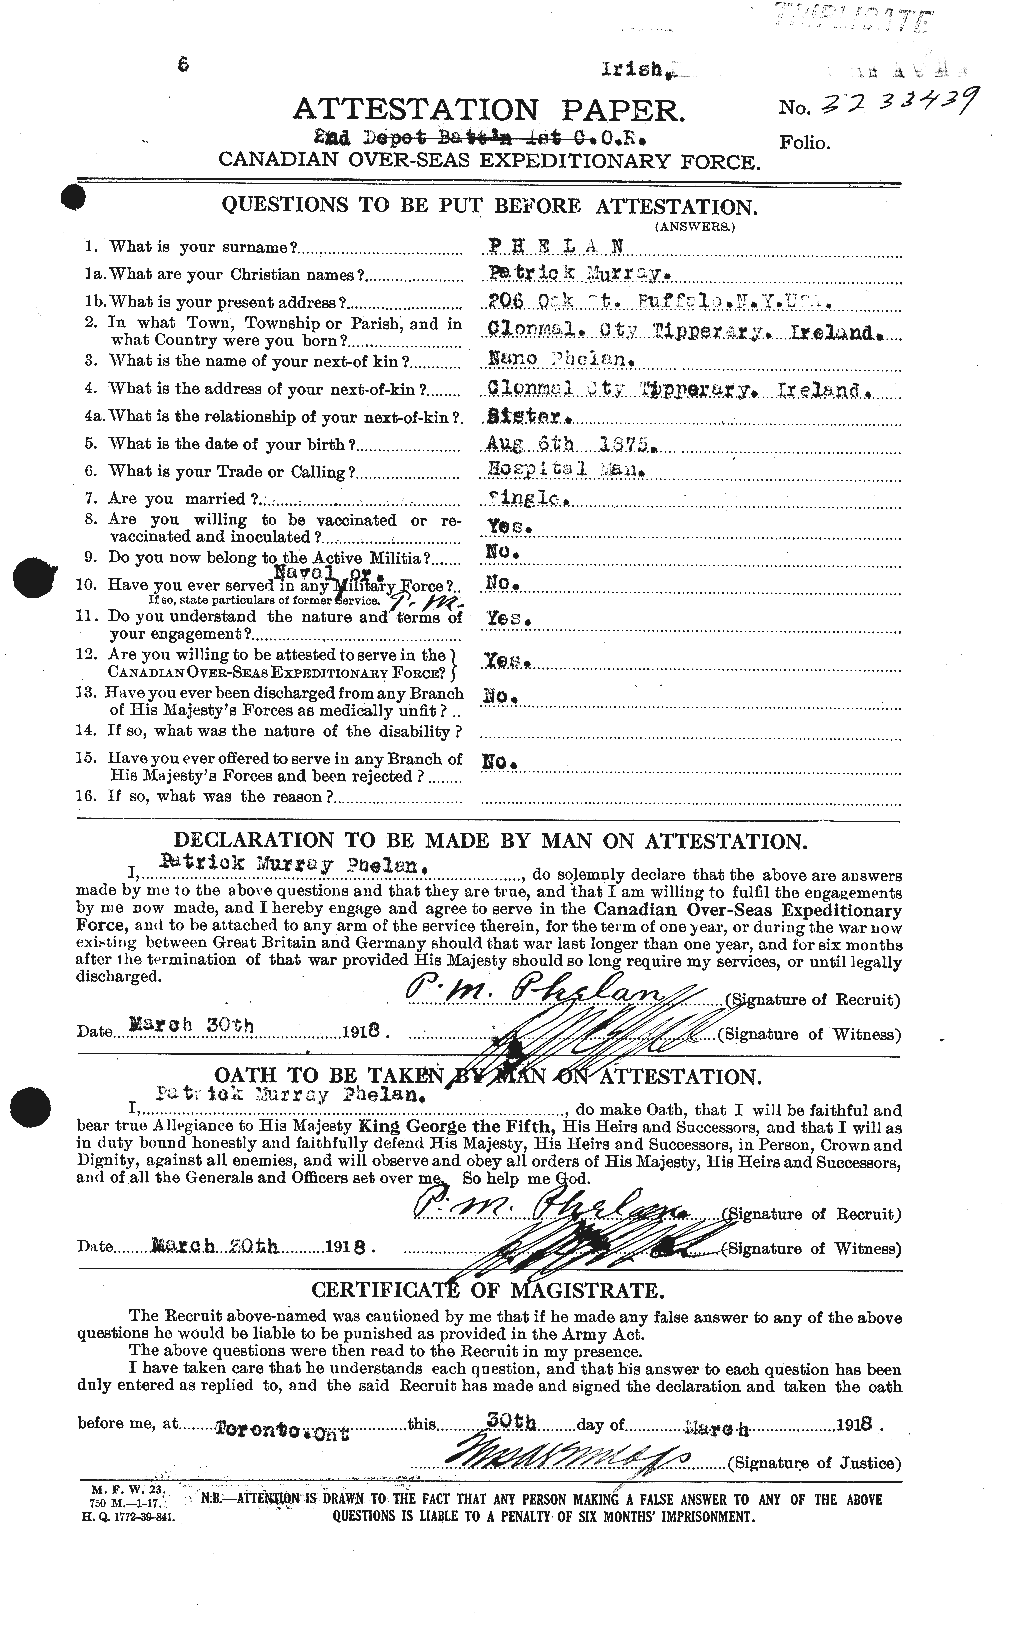 Personnel Records of the First World War - CEF 576967a